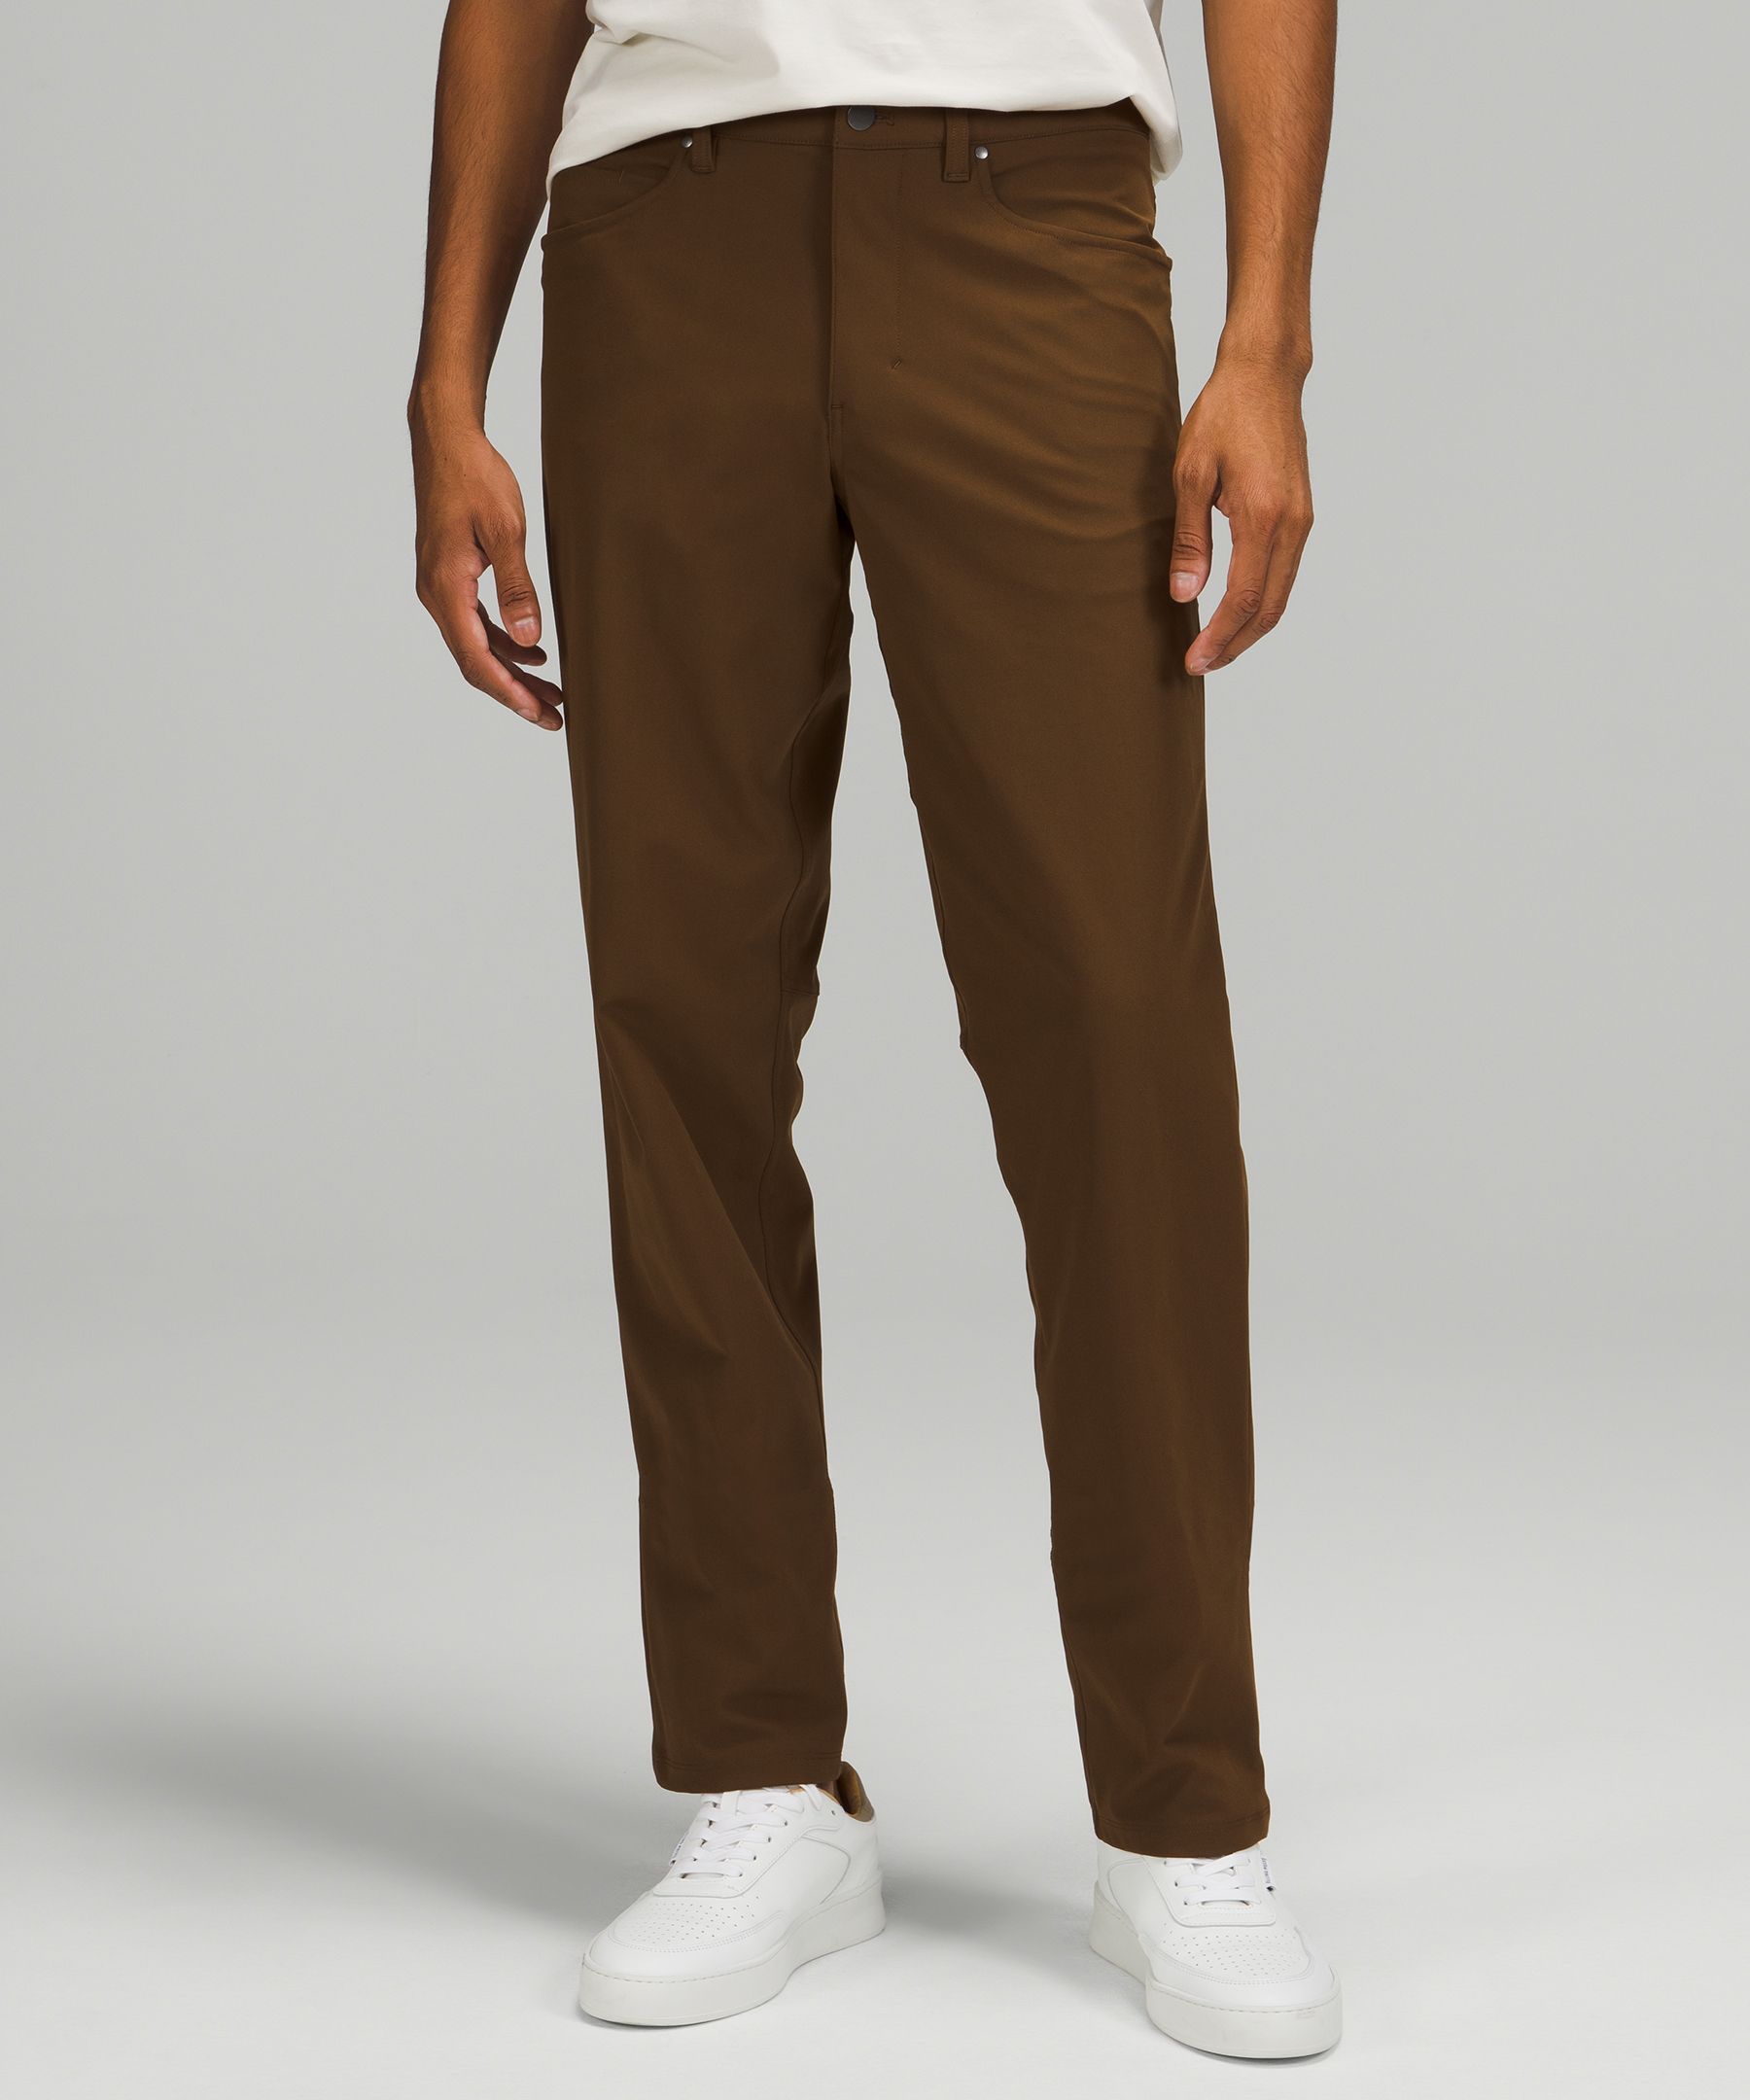 Lululemon Abc Classic-fit Pants 28 Warpstreme In Brown